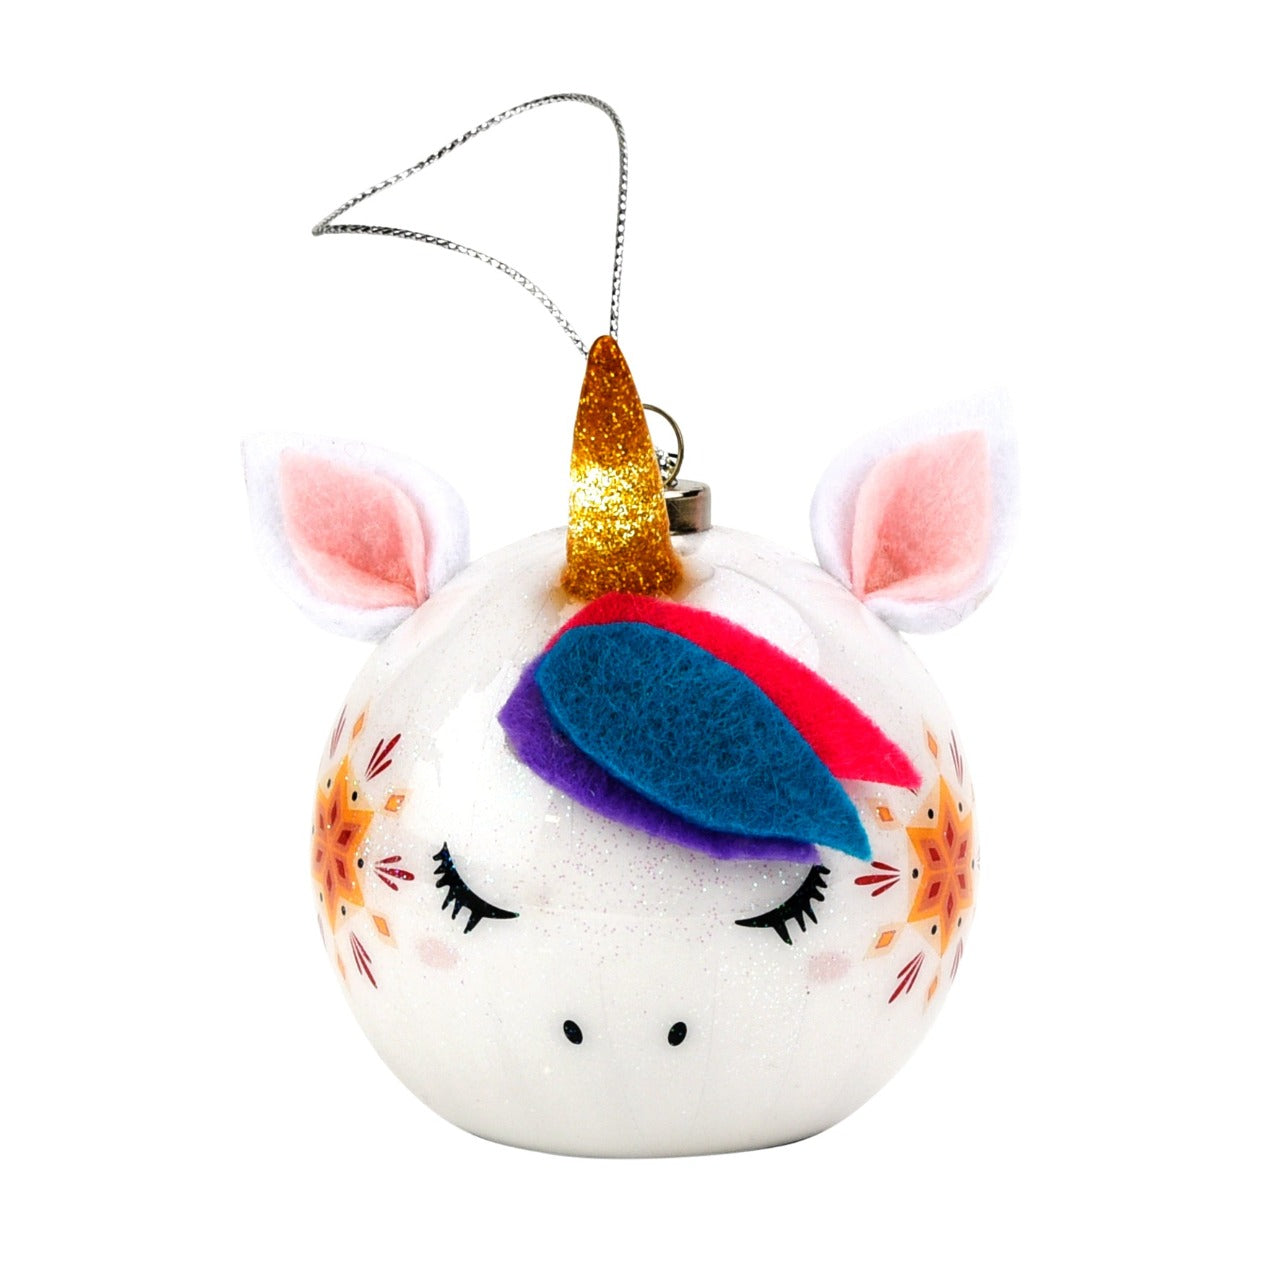 Christmas LED Light Up Unicorn Head Decoration  This fun and quirky Unicorn head decoration would make a cheerful and unique addition to any tree this year. With an LED light up glittery horn, this is certain to brighten up any living space.